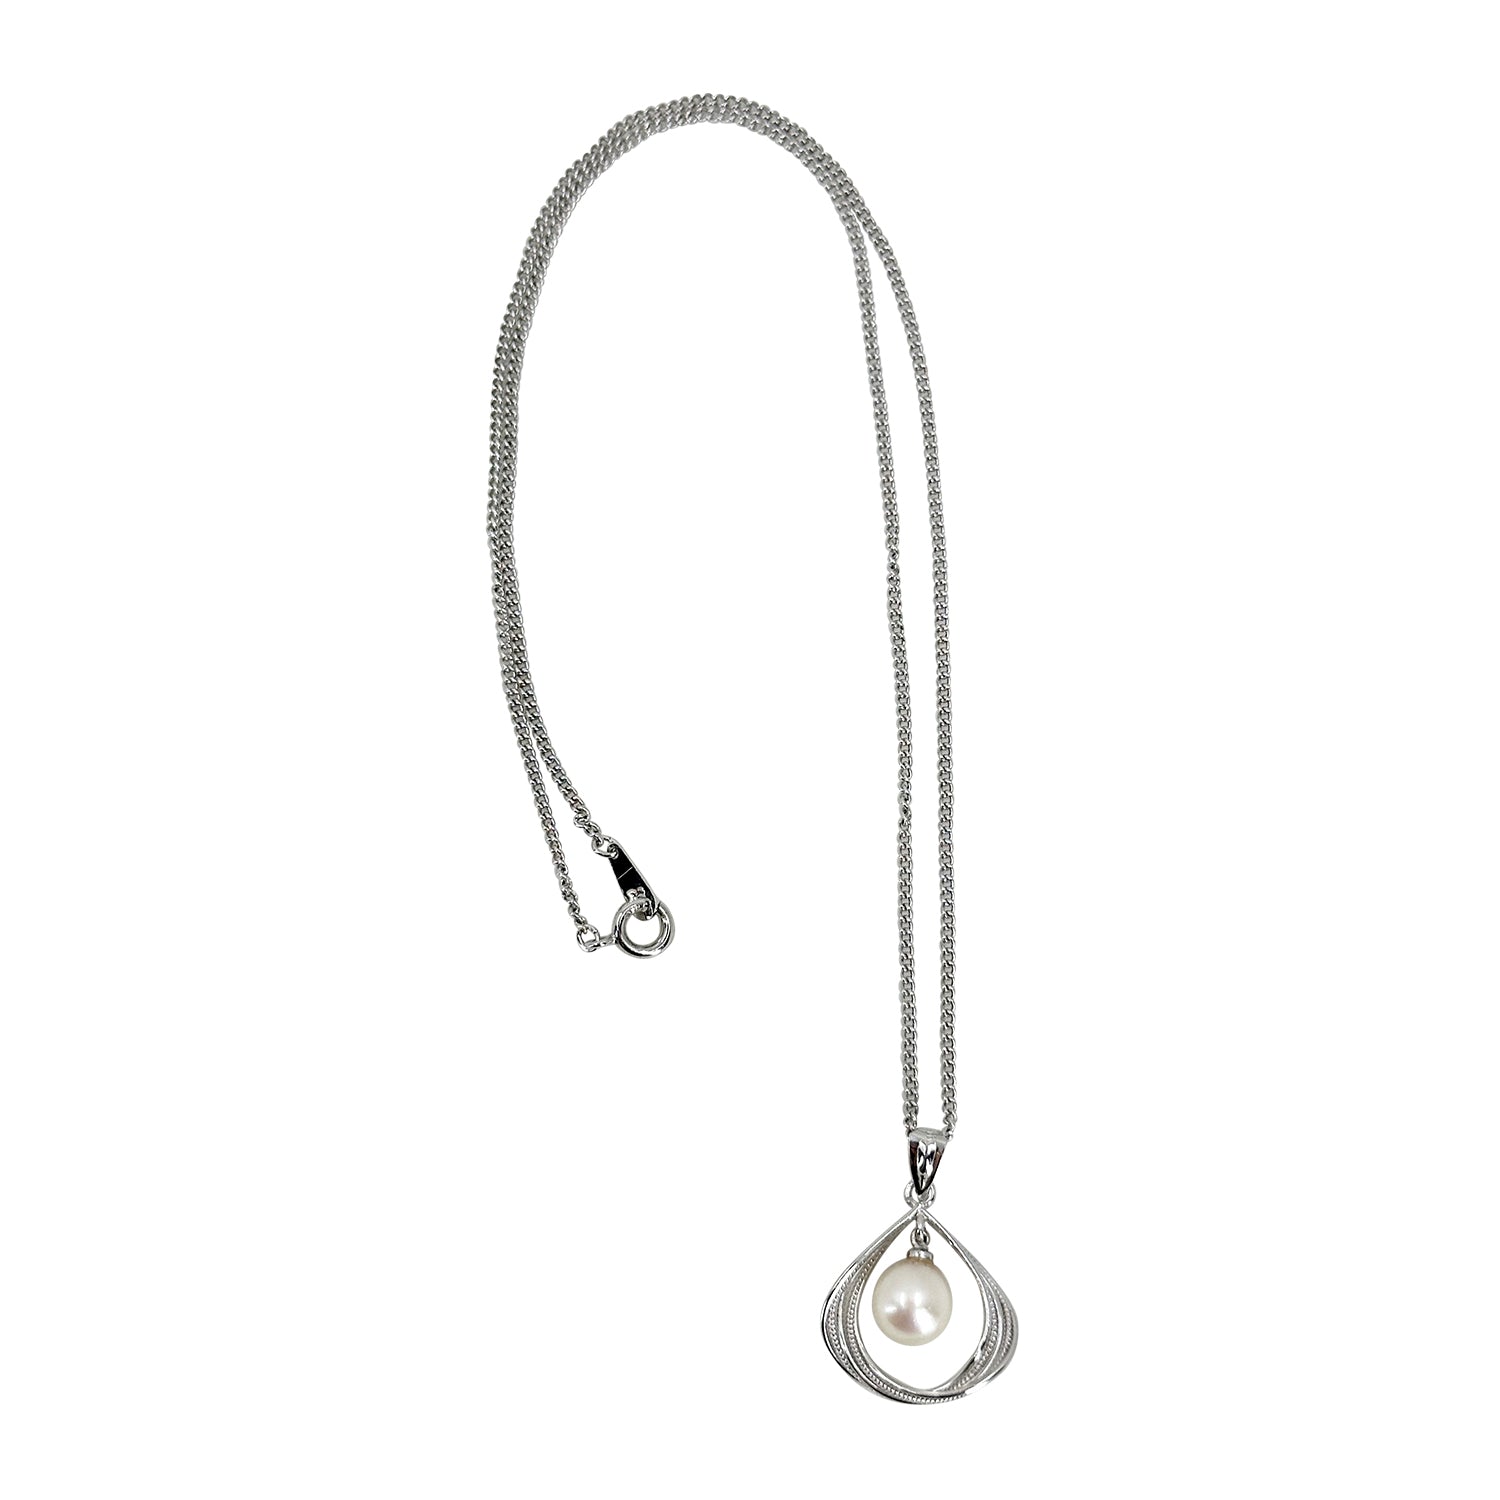 Simple Modernist Japanese Saltwater Akoya Cultured Pearl Vintage Pendant Necklace- Sterling Silver 17 Inch